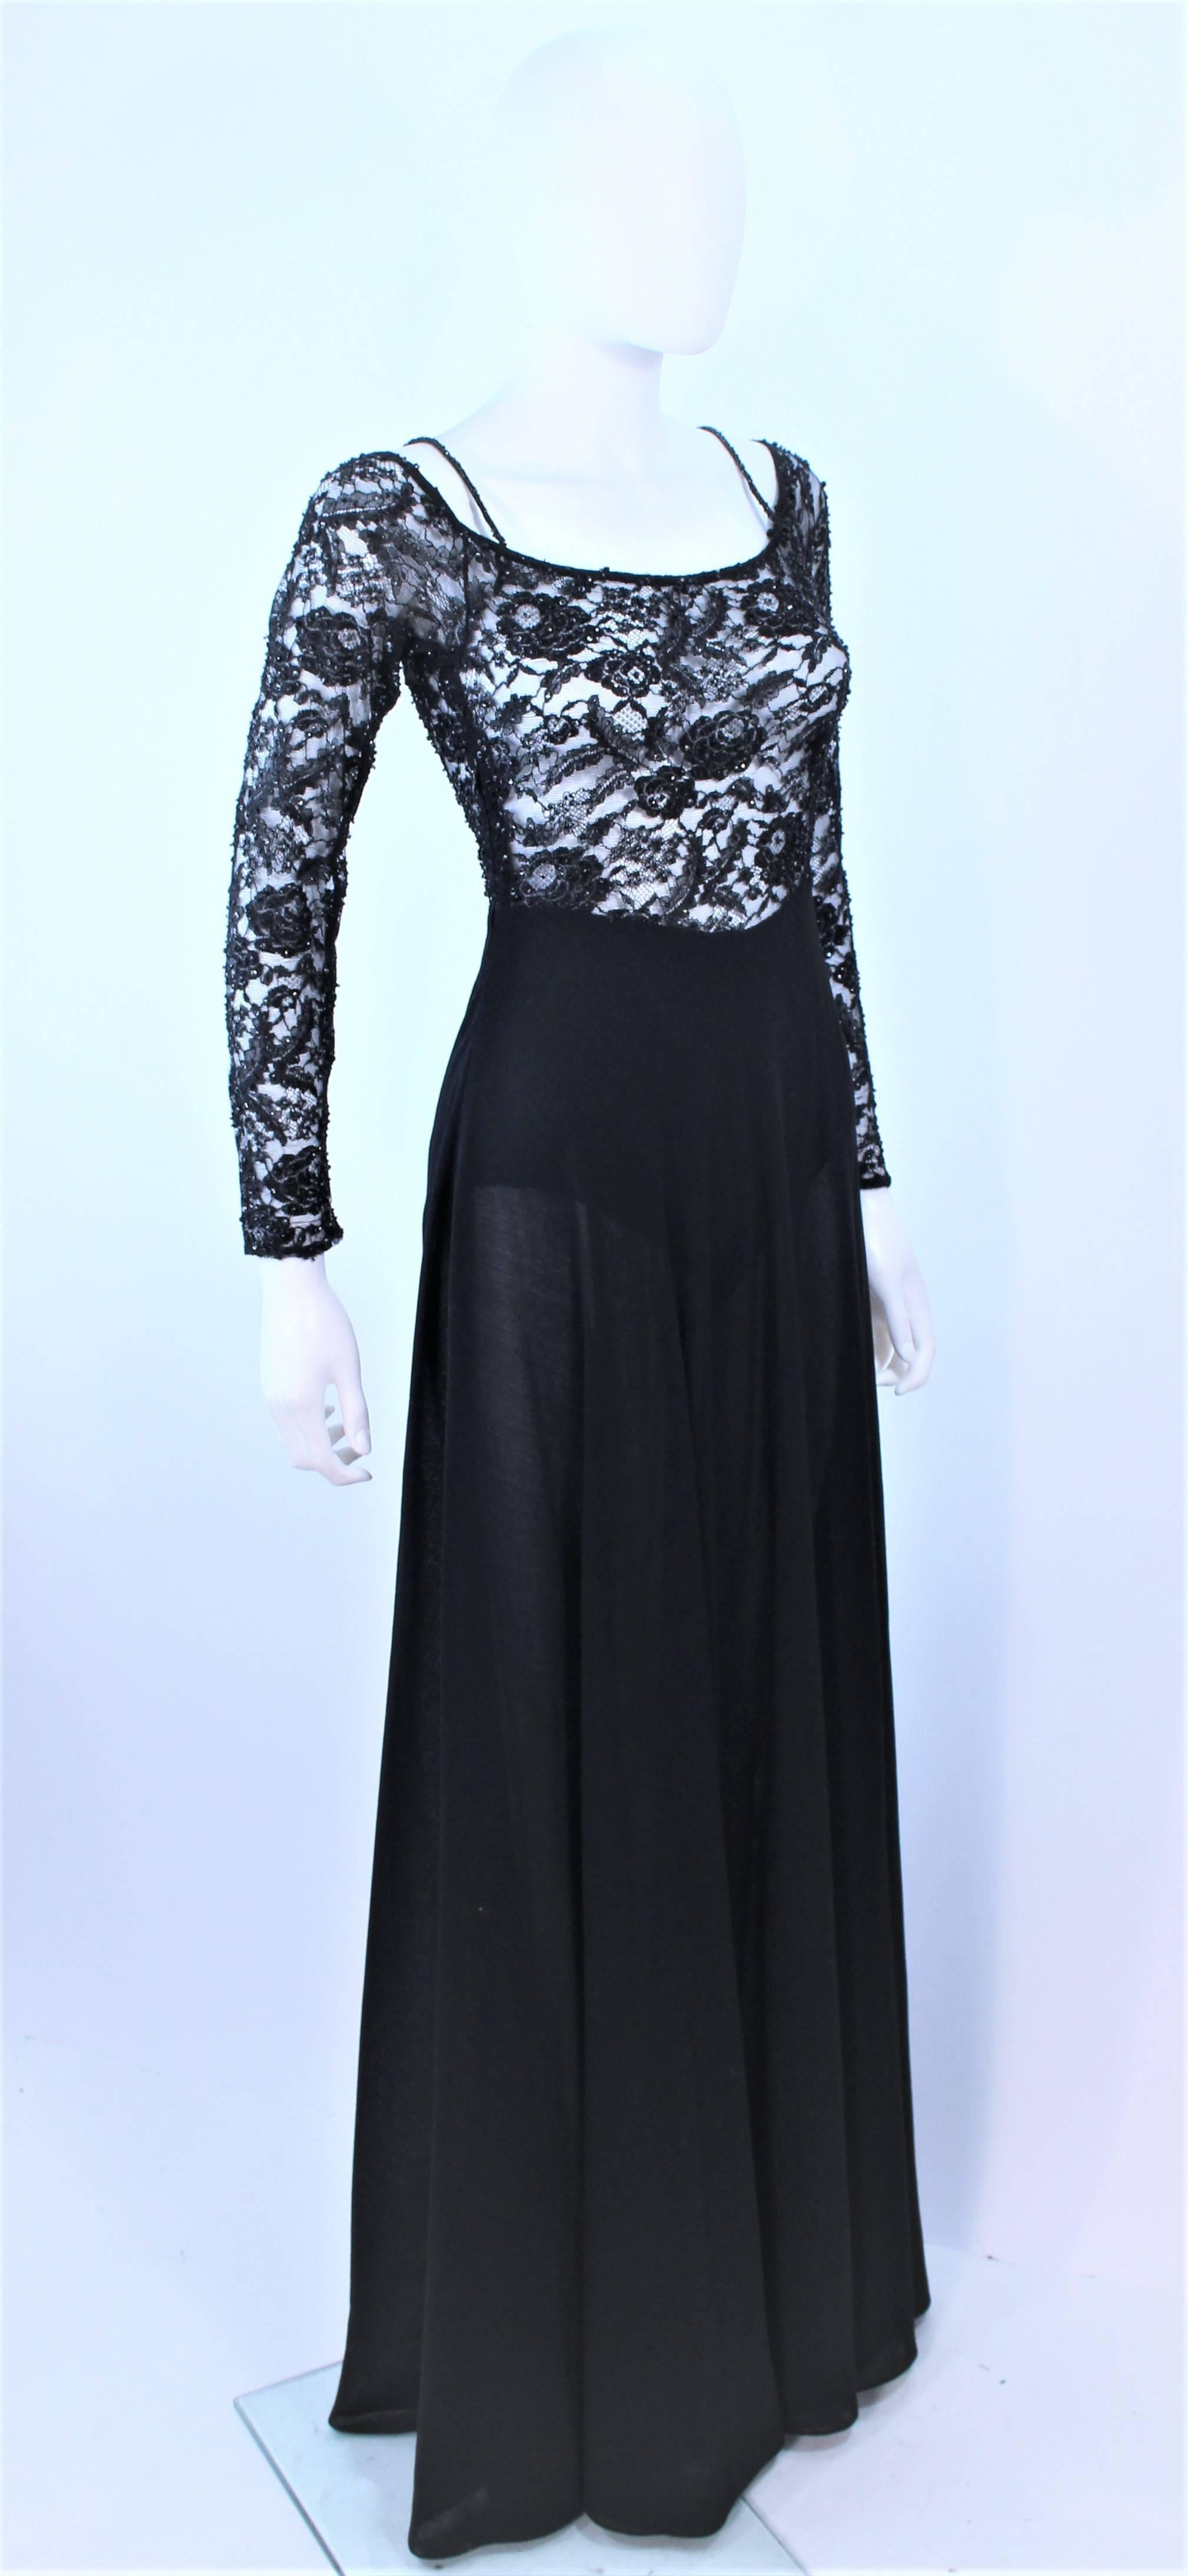 DONNA KARAN Black Lace Beaded Wool Gown Size 4 6 For Sale 1